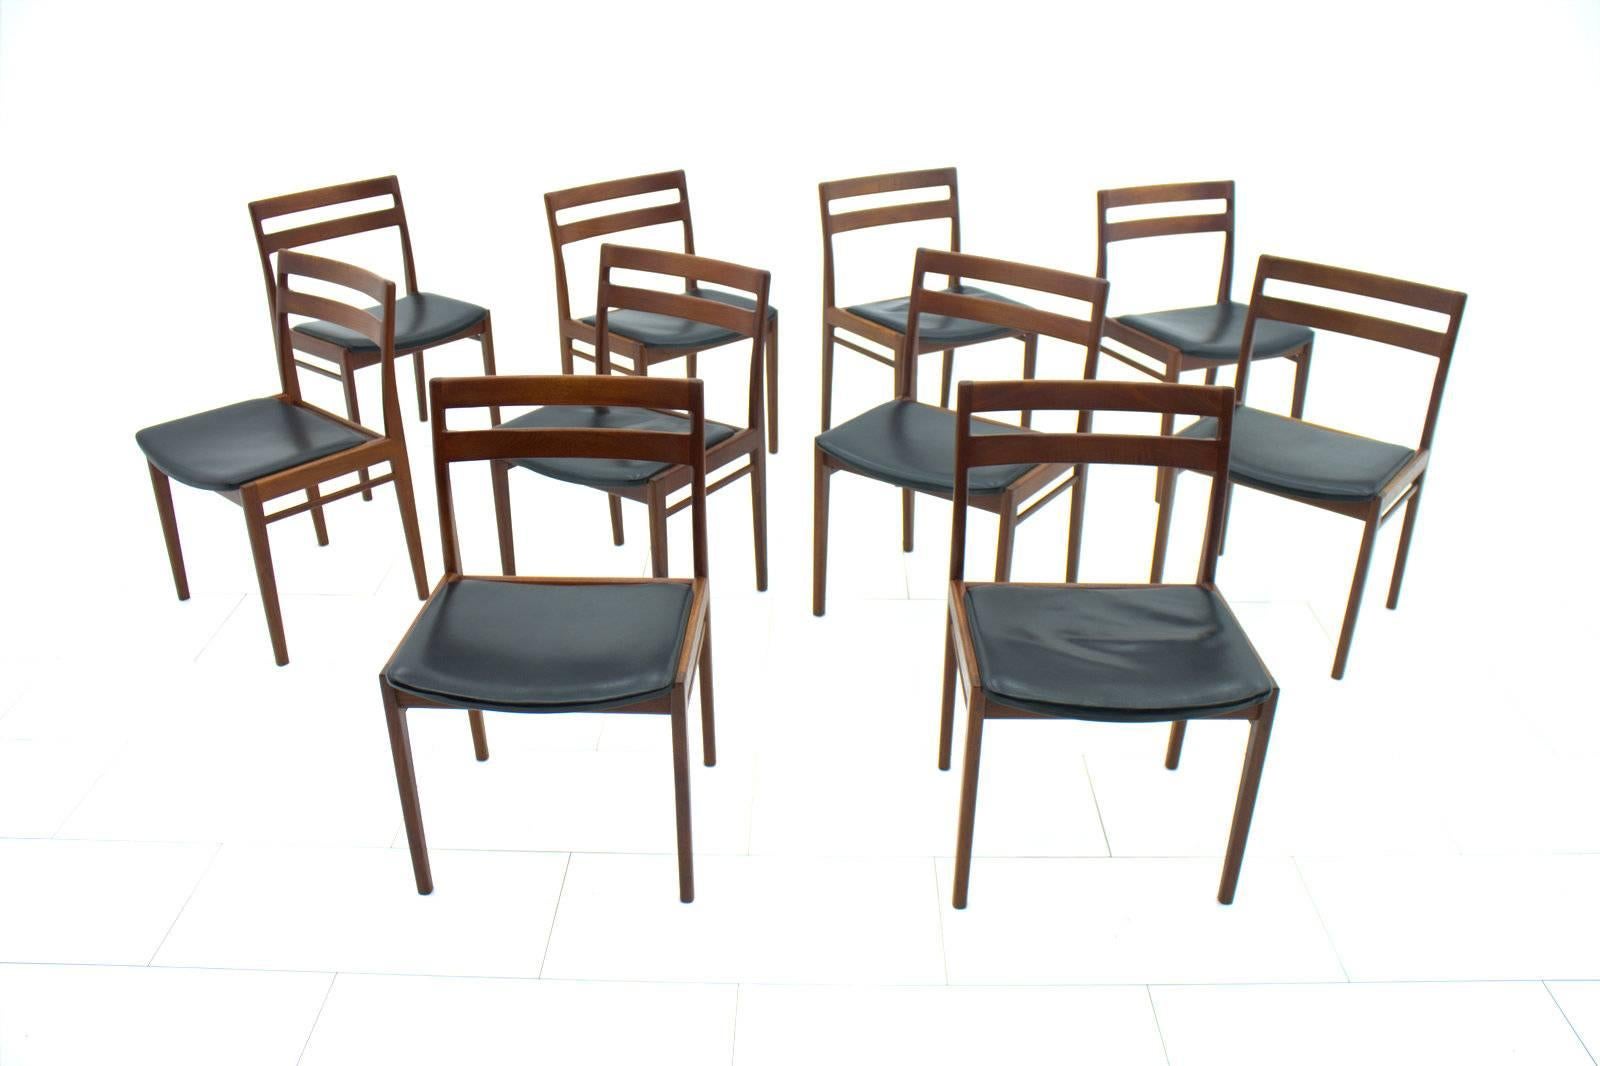 Mid-20th Century Set of Ten Danish Teak and Leather Dining Chairs by Rosengren Hansen, 1960s For Sale